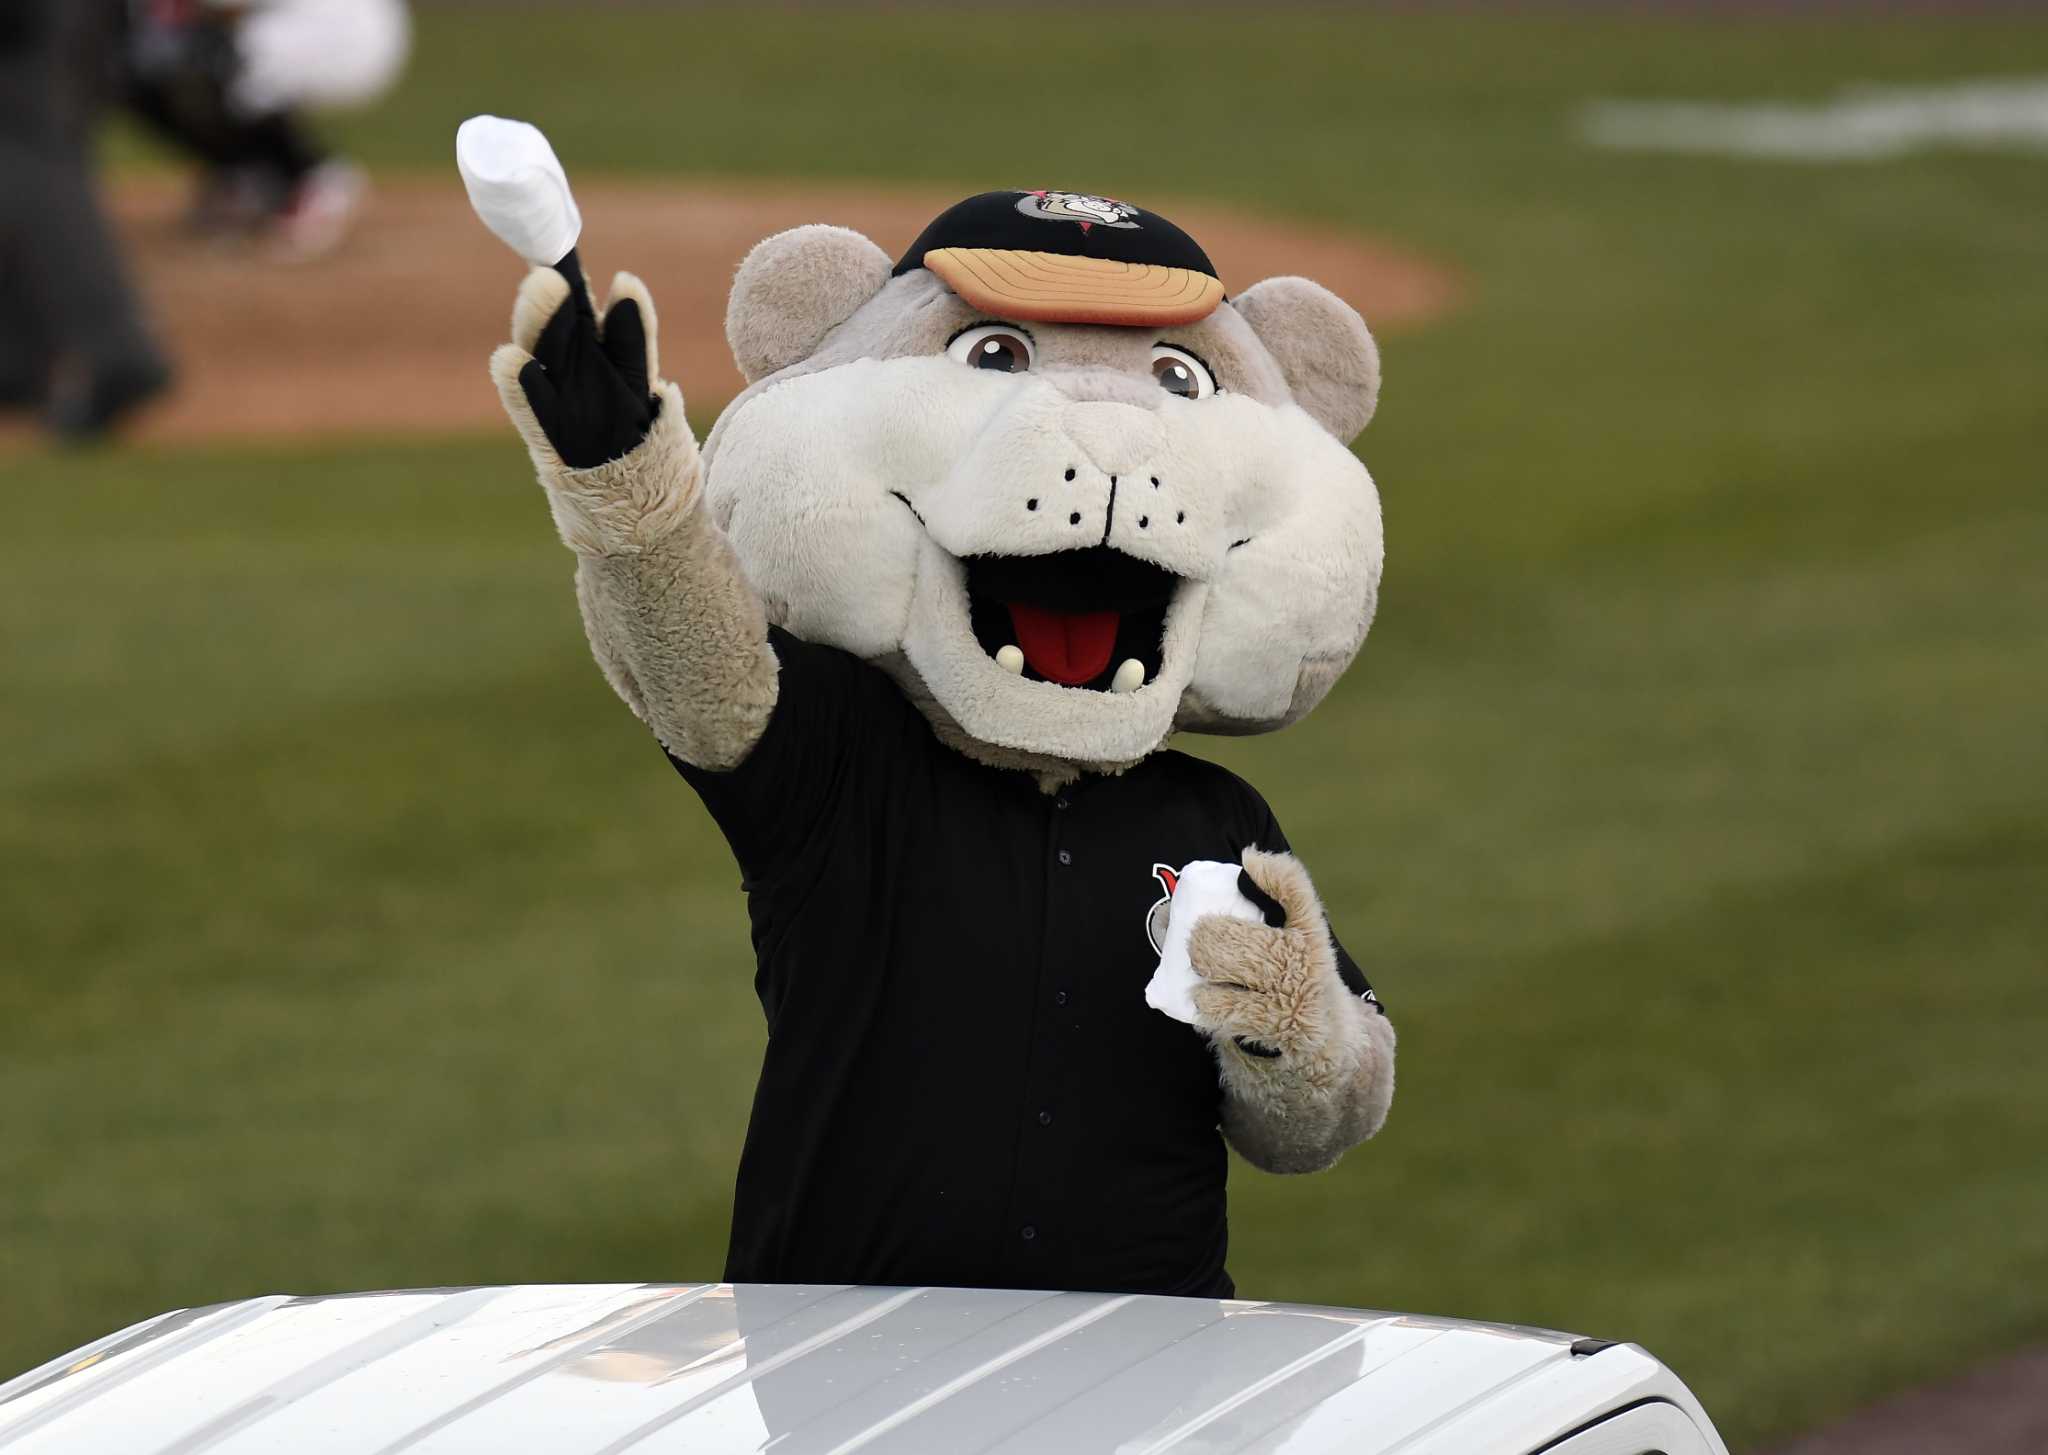 ValleyCats lose to New Jersey in wild ninth inning